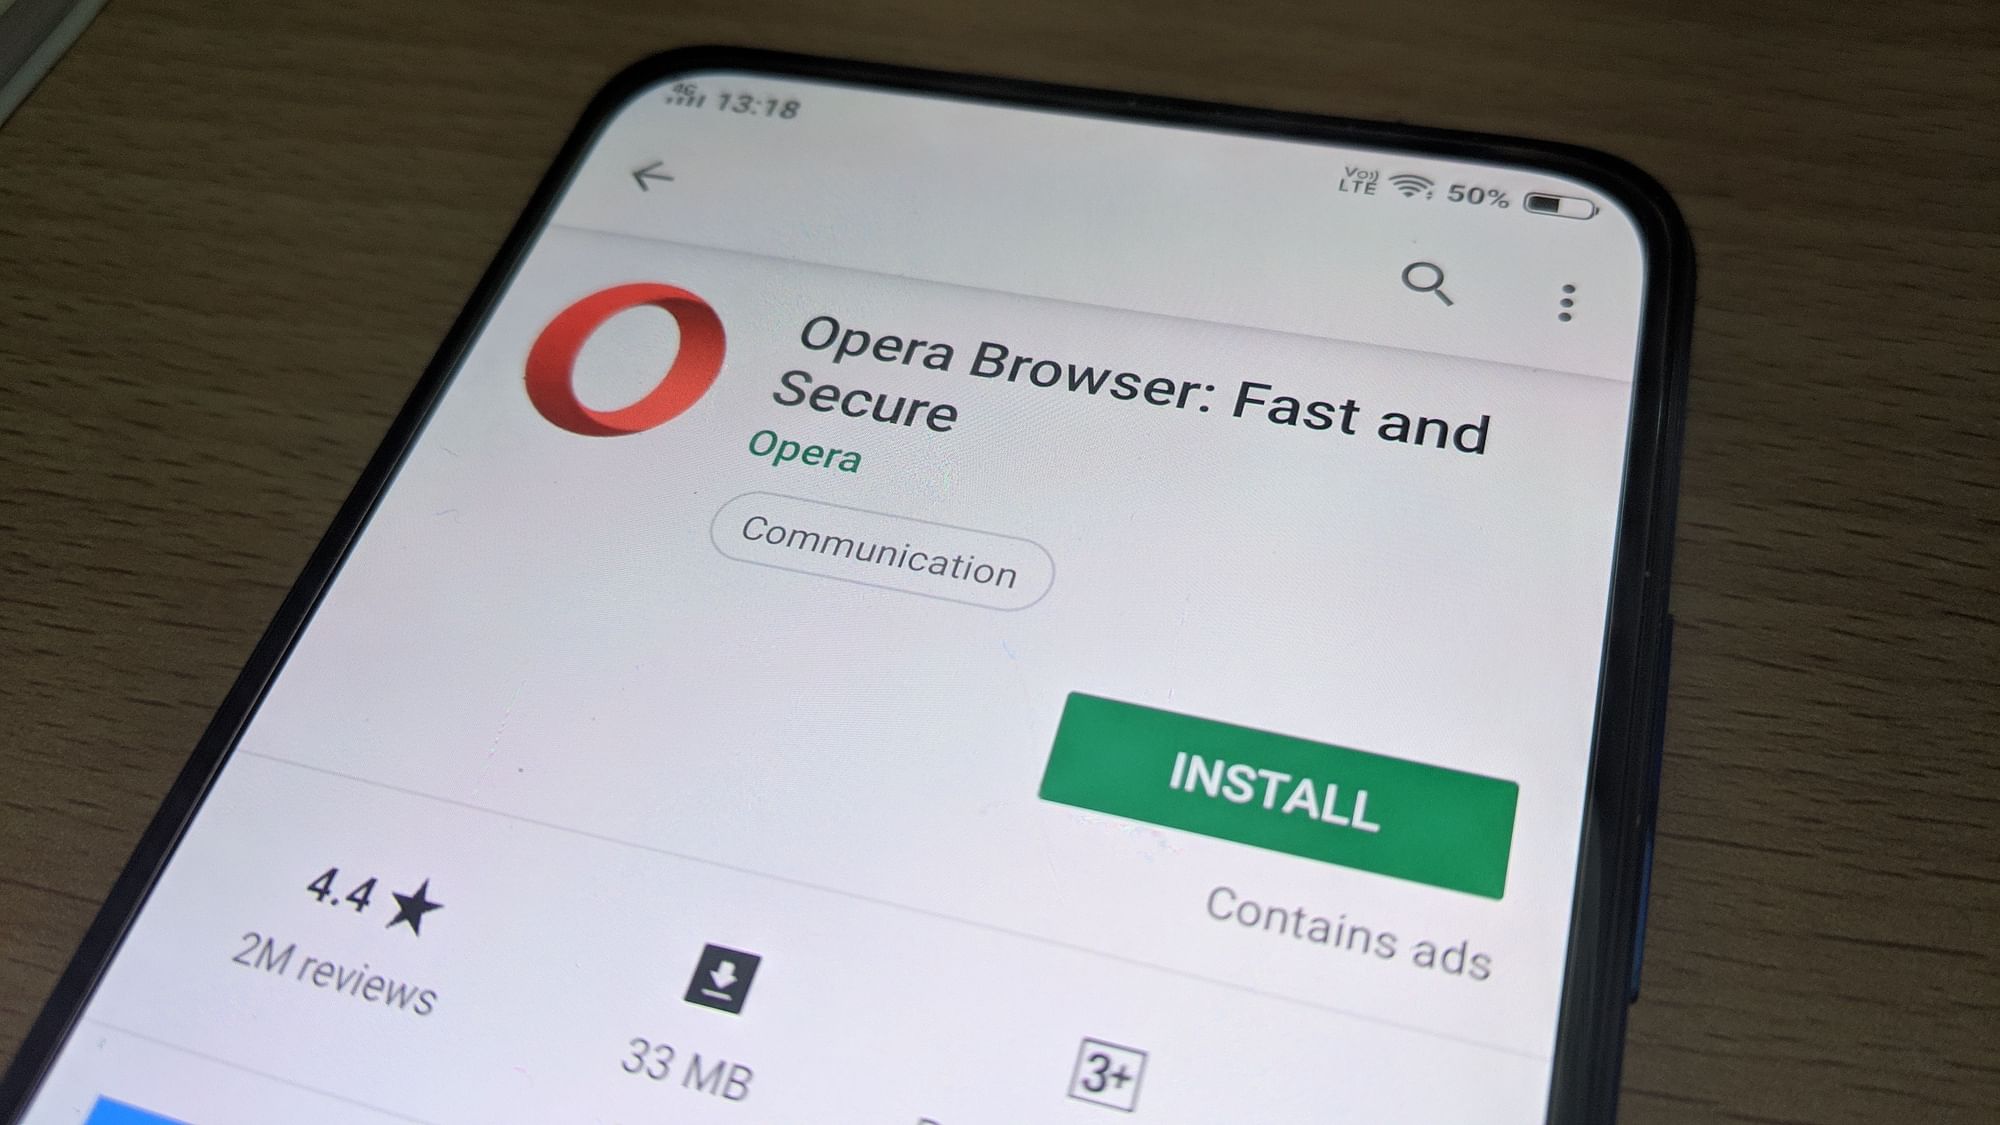 Opera was offering the feature in a beta version of the app till now.